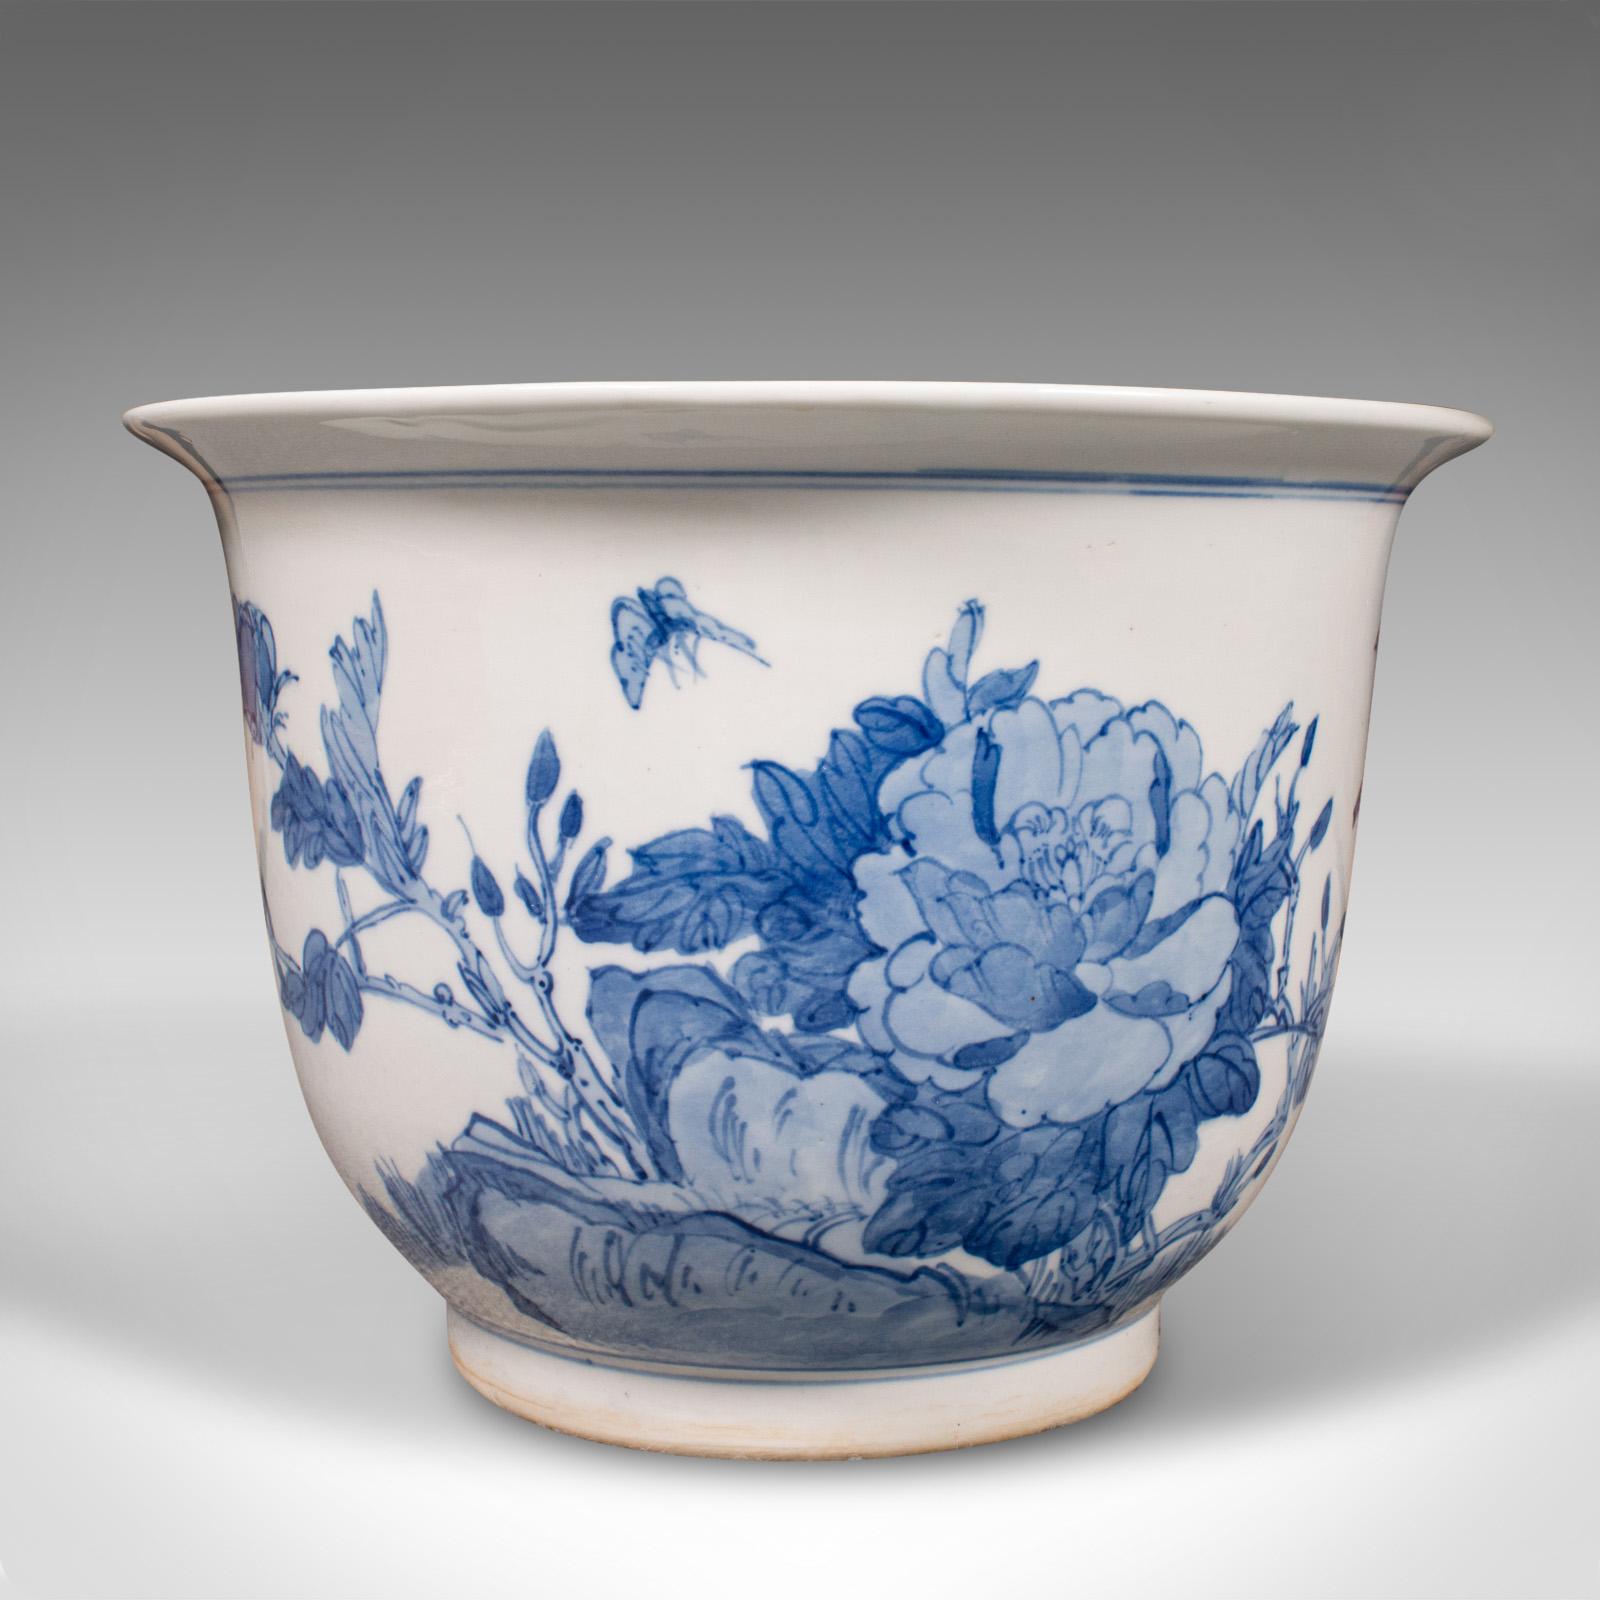 This is a vintage decorative planter. A Chinese, ceramic blue and white jardiniere pot, dating to the mid 20th century, circa 1960.

Charming planter with appealing decorative finish
Displaying a desirable aged patina throughout
Traditional blue